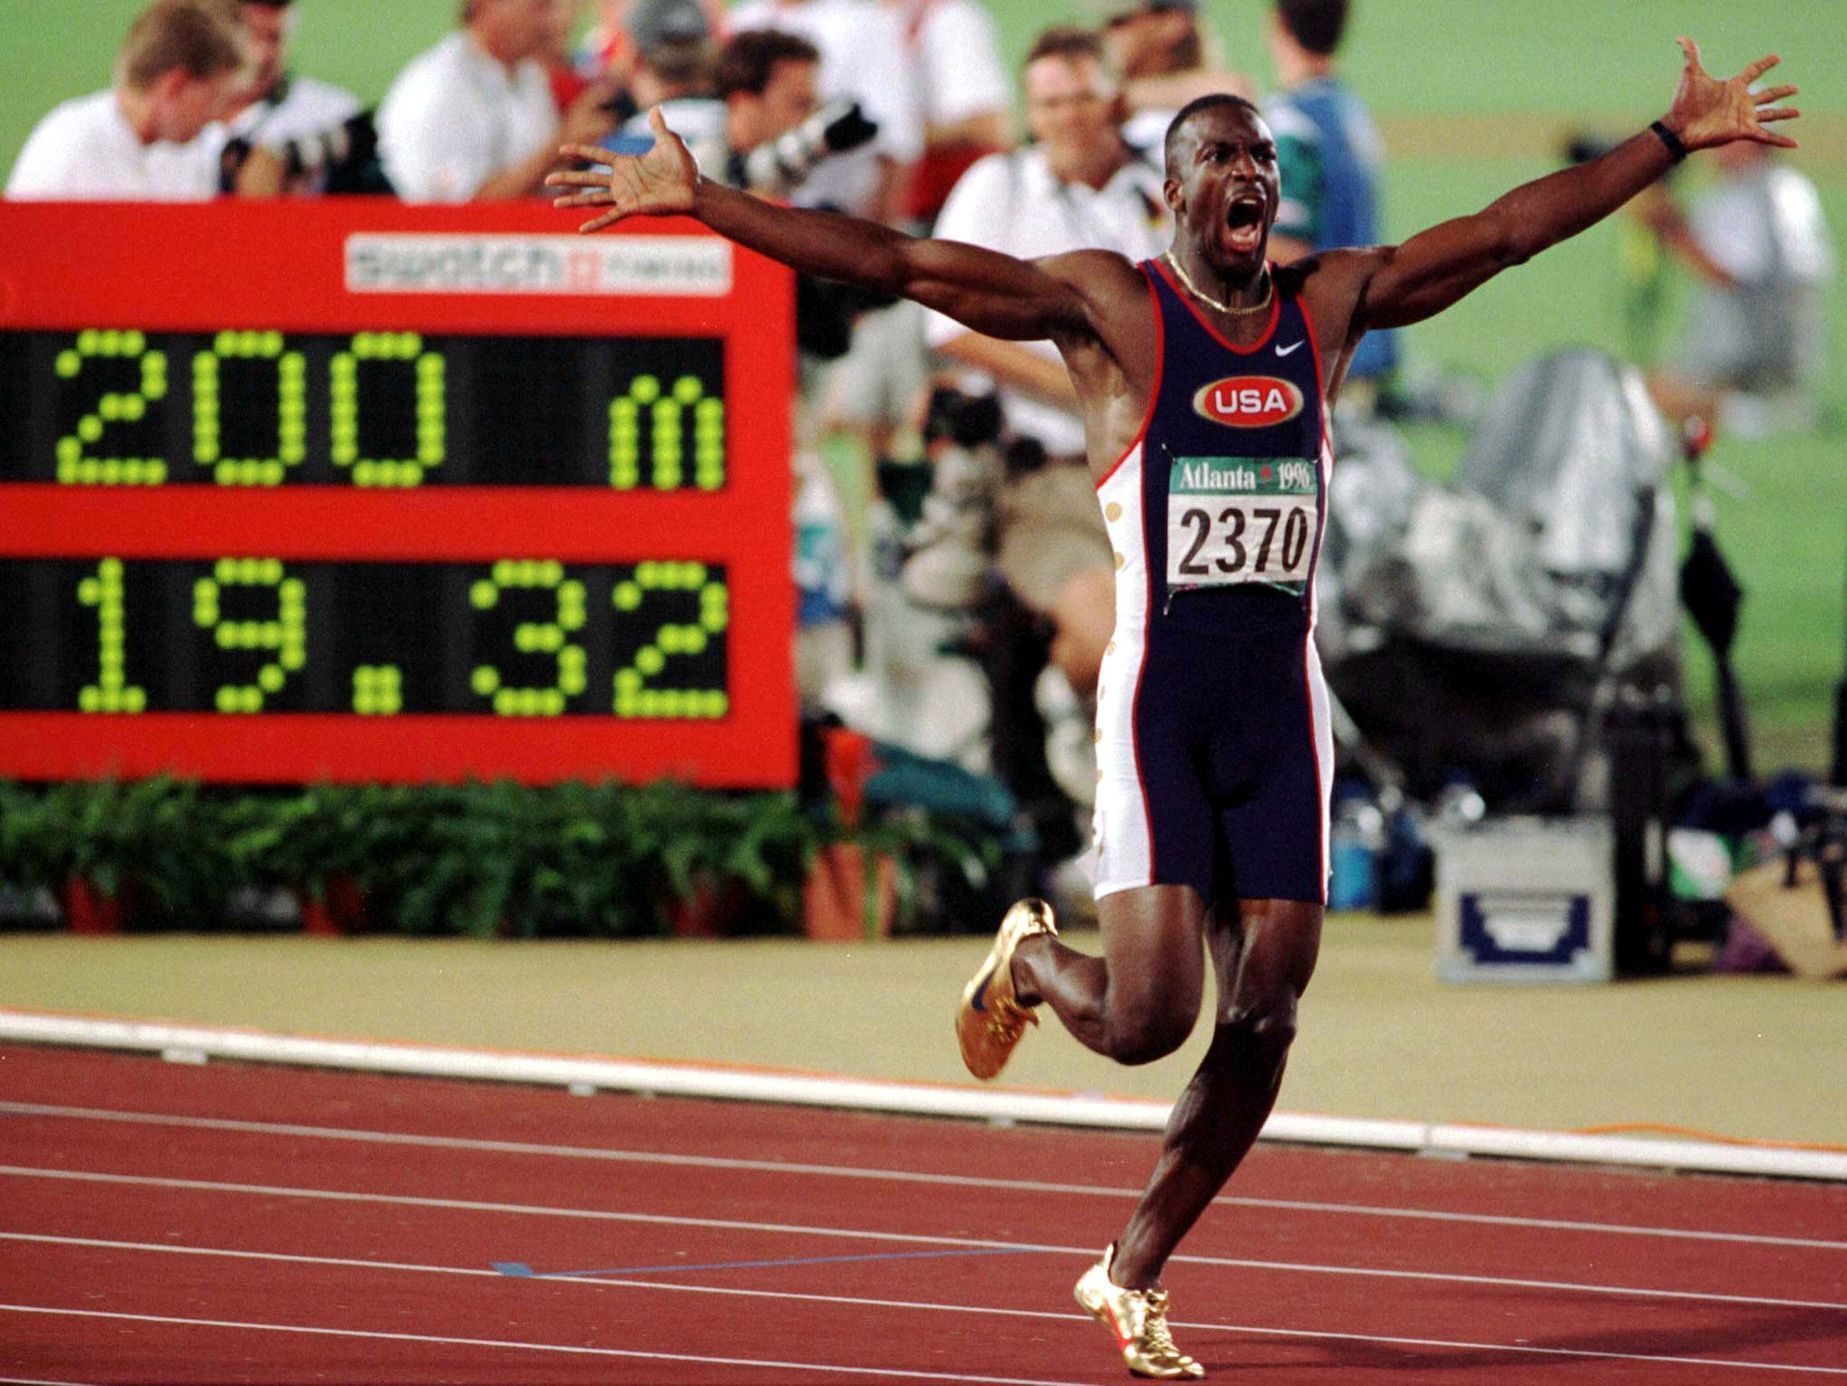 FILE PHOTO: U.S.' Johnson celebrates after breaking world record in 200M finals at Atlanta Olympics